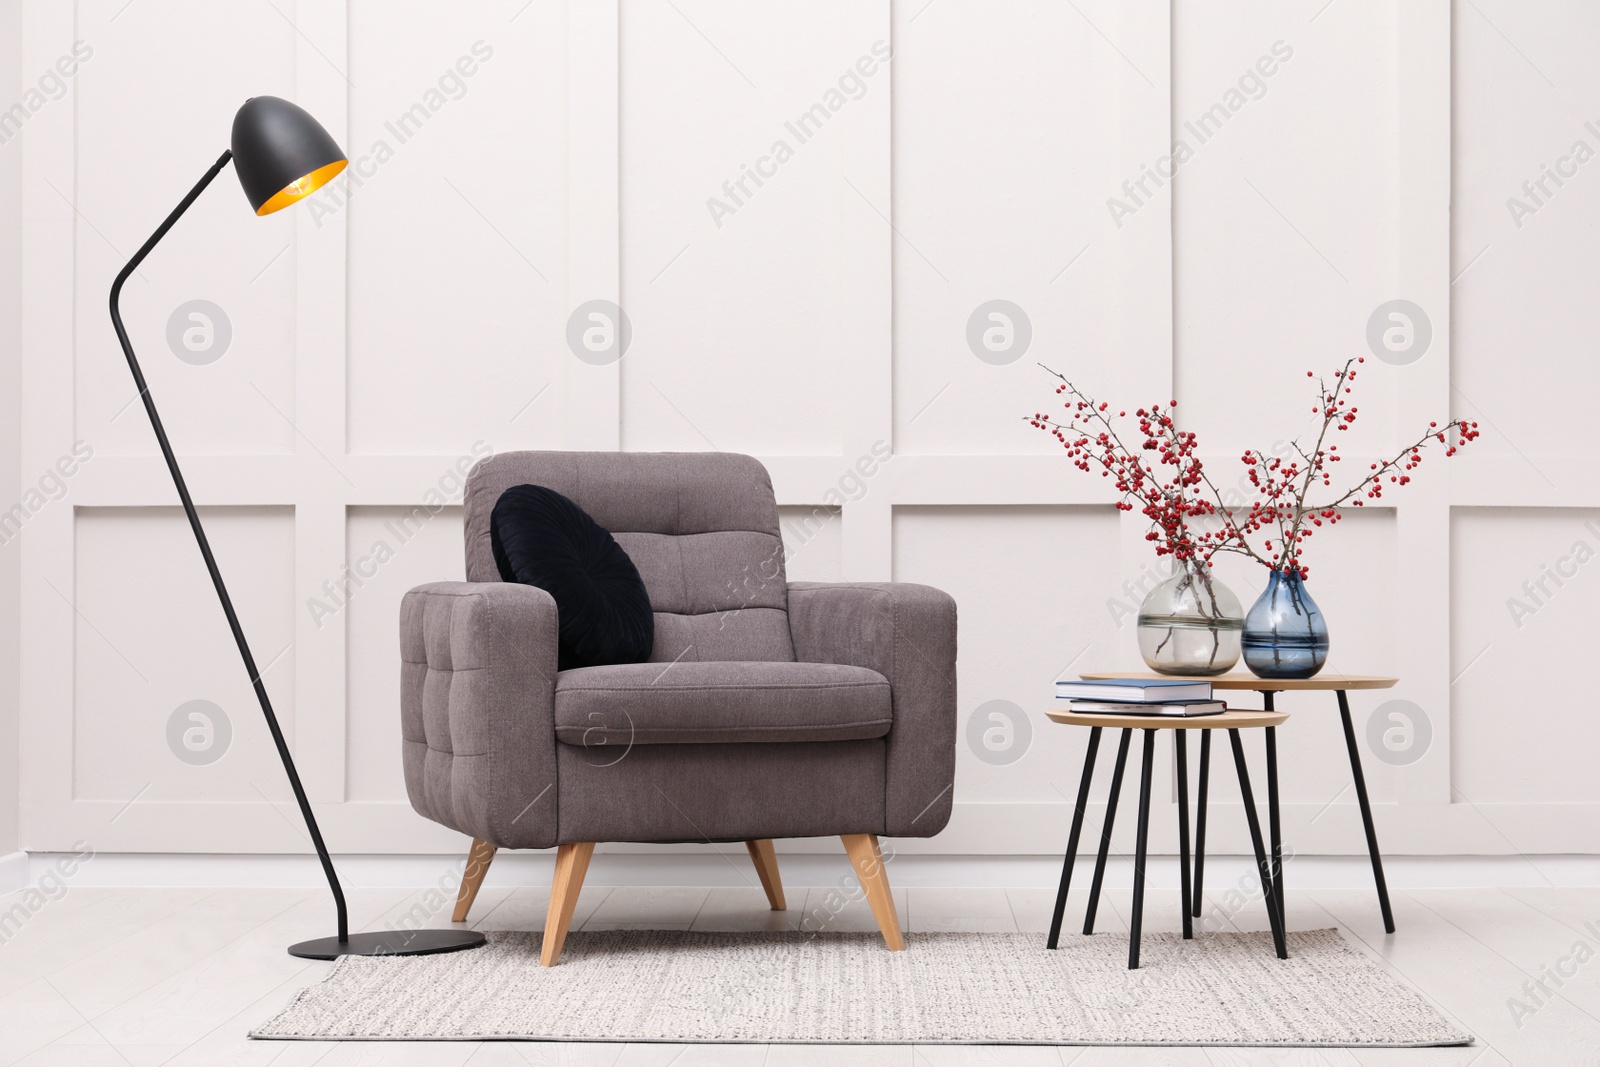 Photo of Hawthorn branches with red berries in vases, armchair and lamp indoors. Interior design